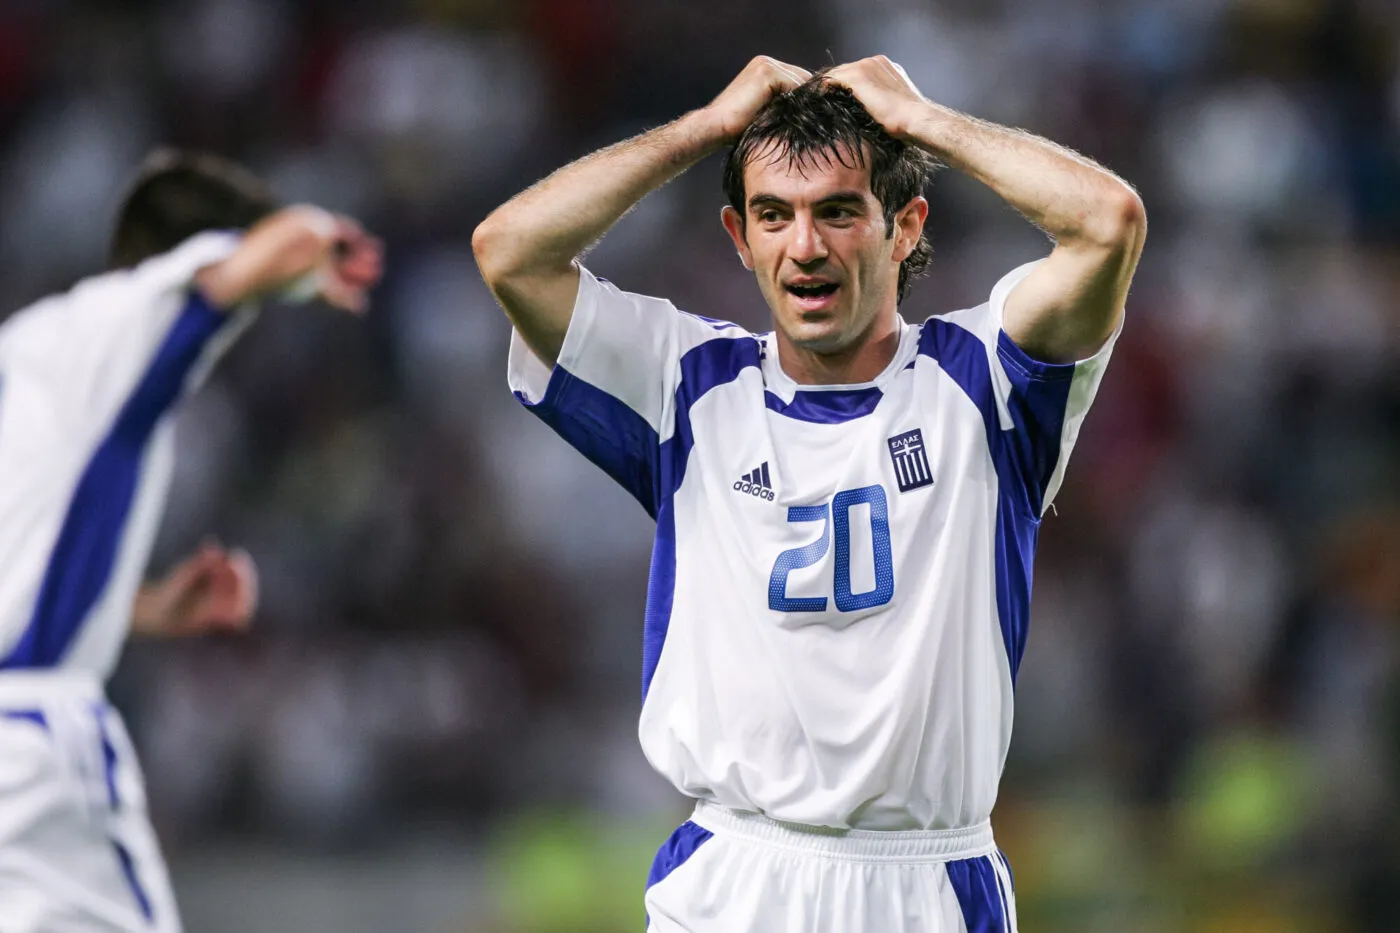 Georgios KARAGOUNIS of Greece celebrates during the Quarter Final European Championship match between France and Greece at Jose Alvalade, Lisbon, Portugal on 25 June 2004 ( Photo by Alain Gadoffre / Onze / Icon Sport )?